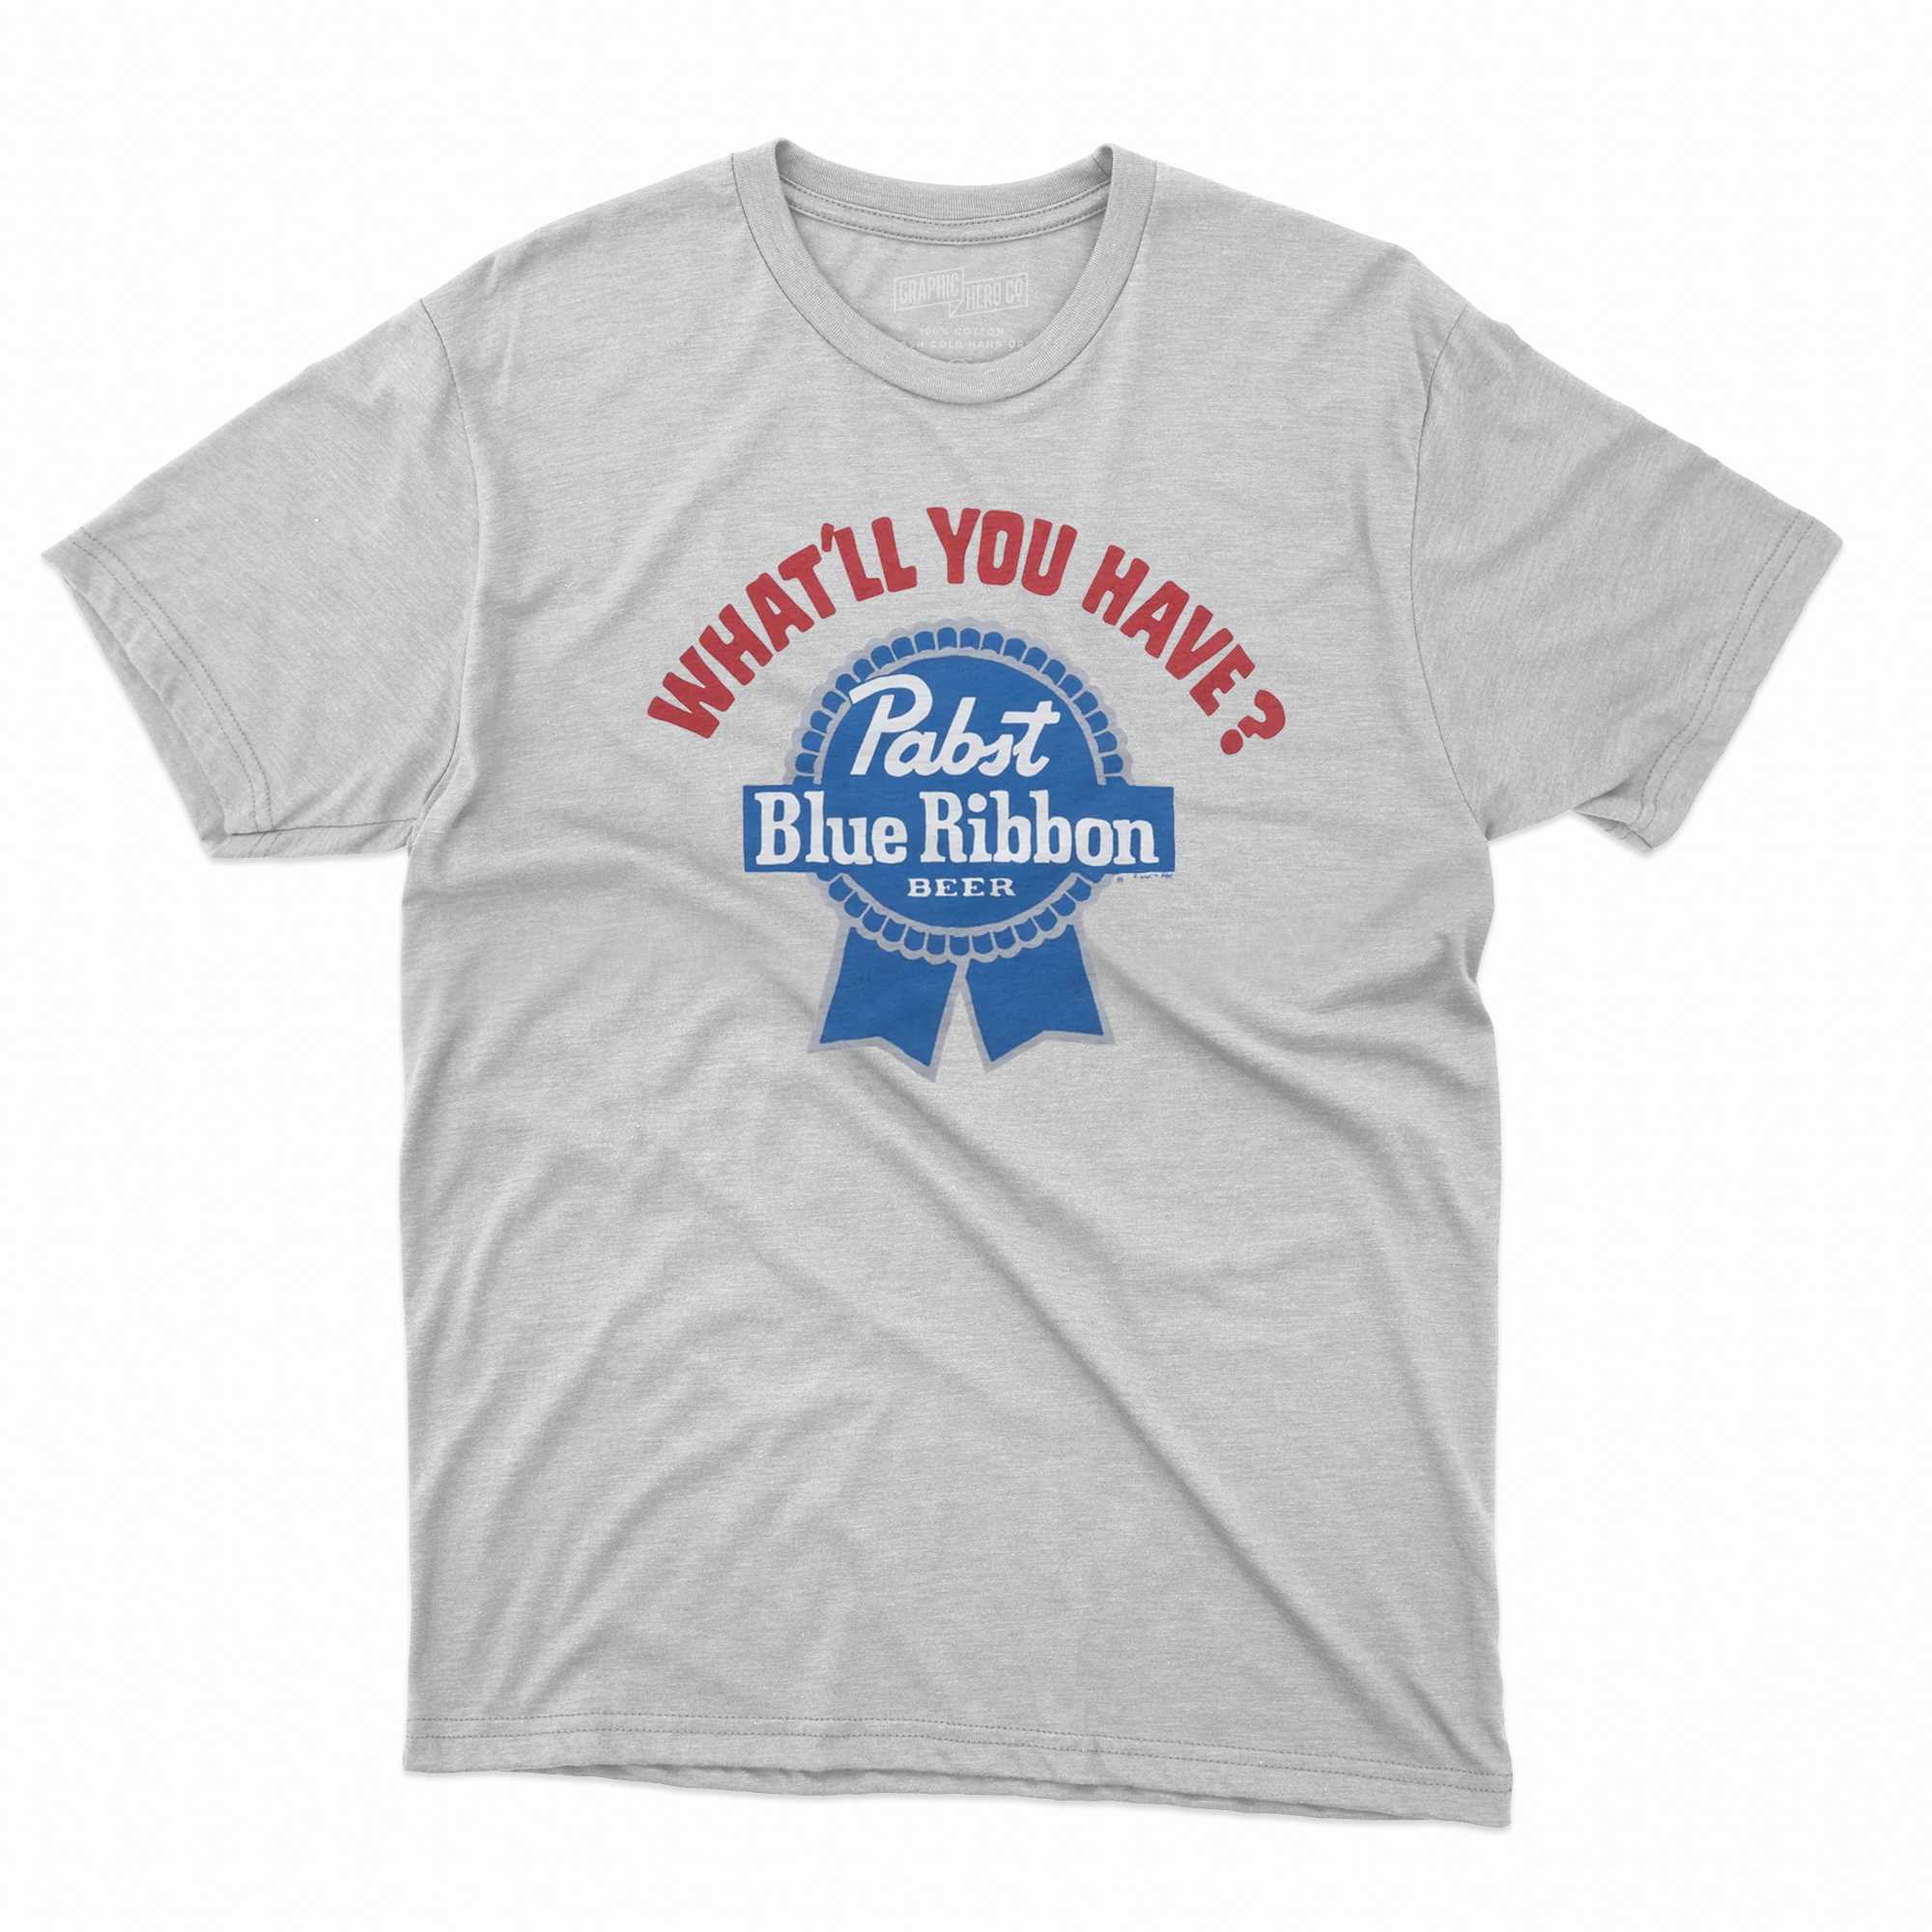 Pabst What'll Have Pabst Blue Ribbon T-shirt Shibtee Clothing